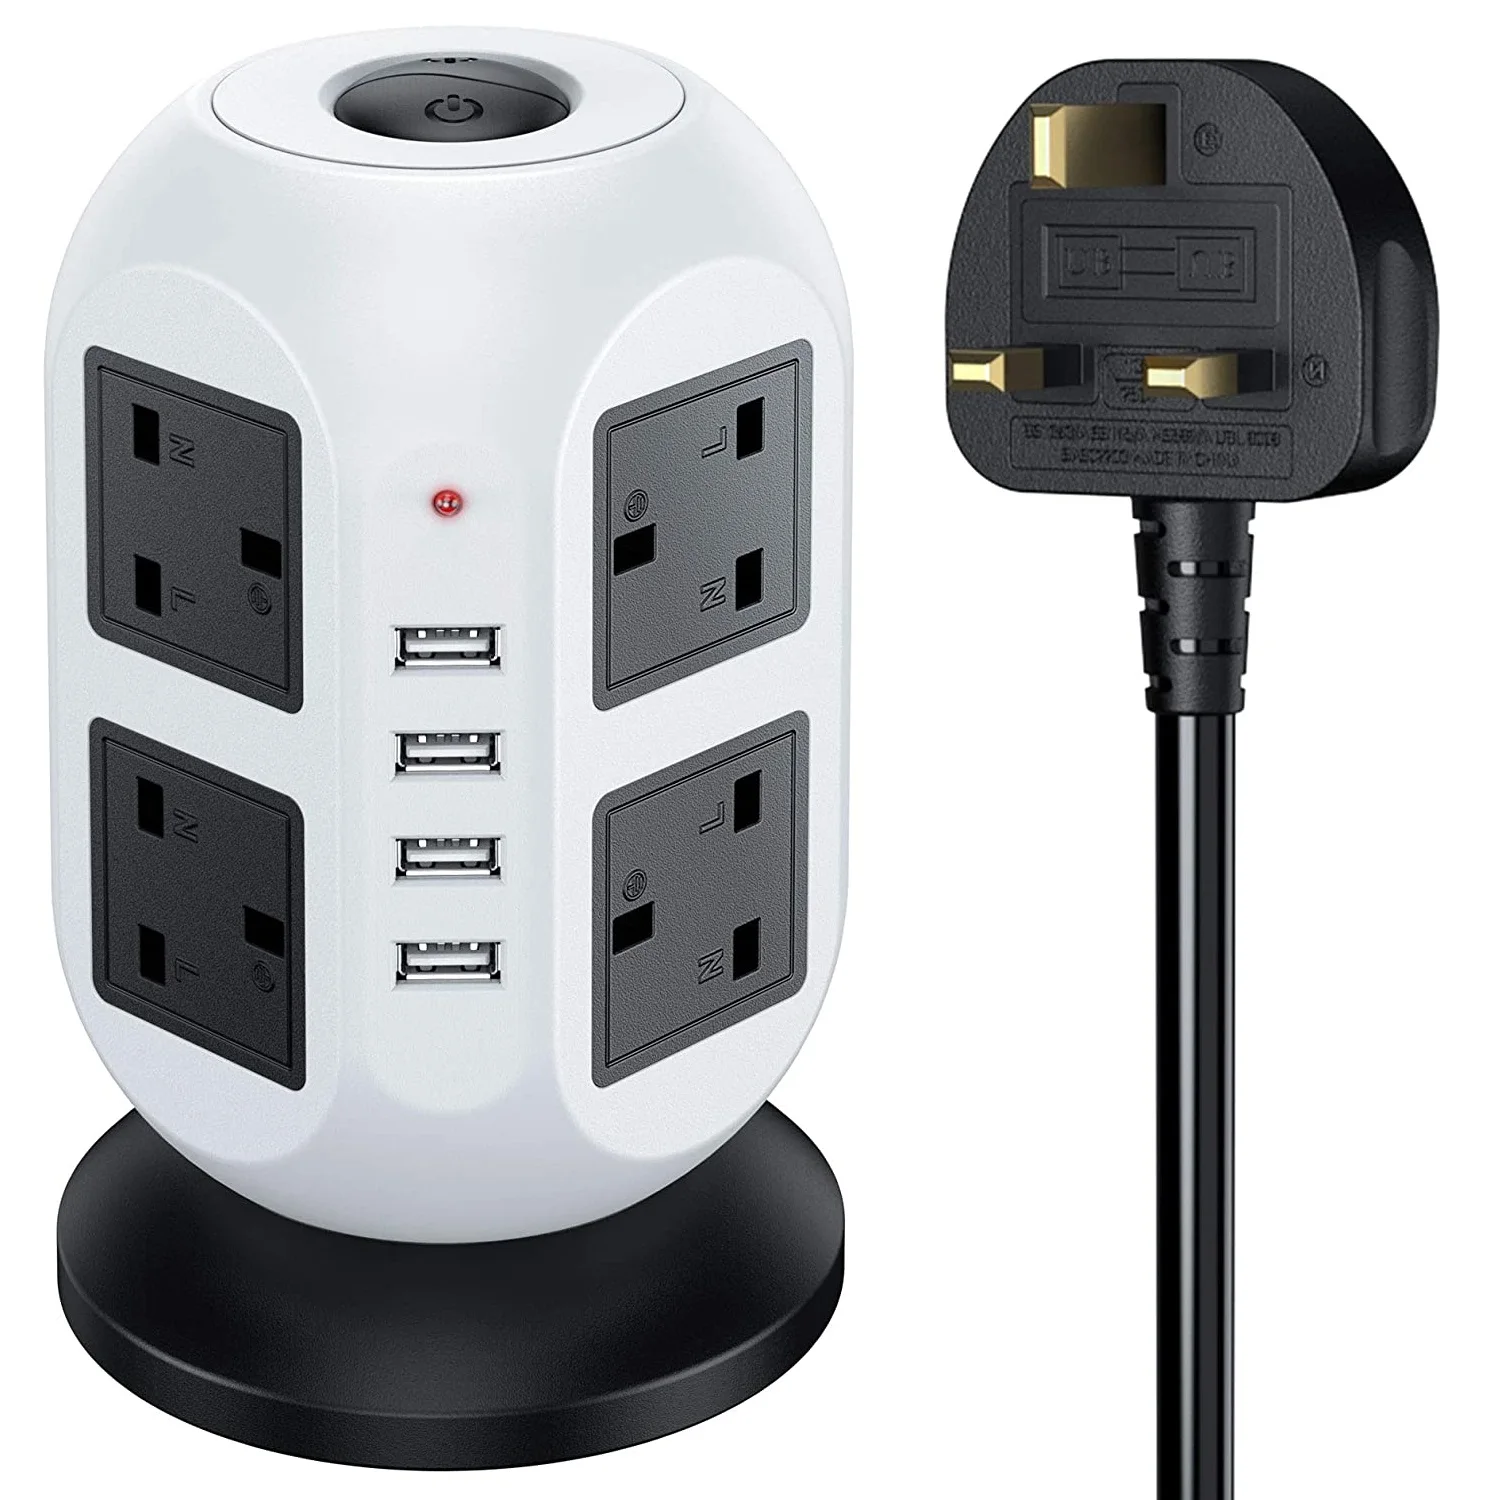 

Tower Power Strip Vertical UK Plug Socket Outlets 8 way AC Multi Electrical Sockets with 4 USB Surge Protector 3m Extension Cord